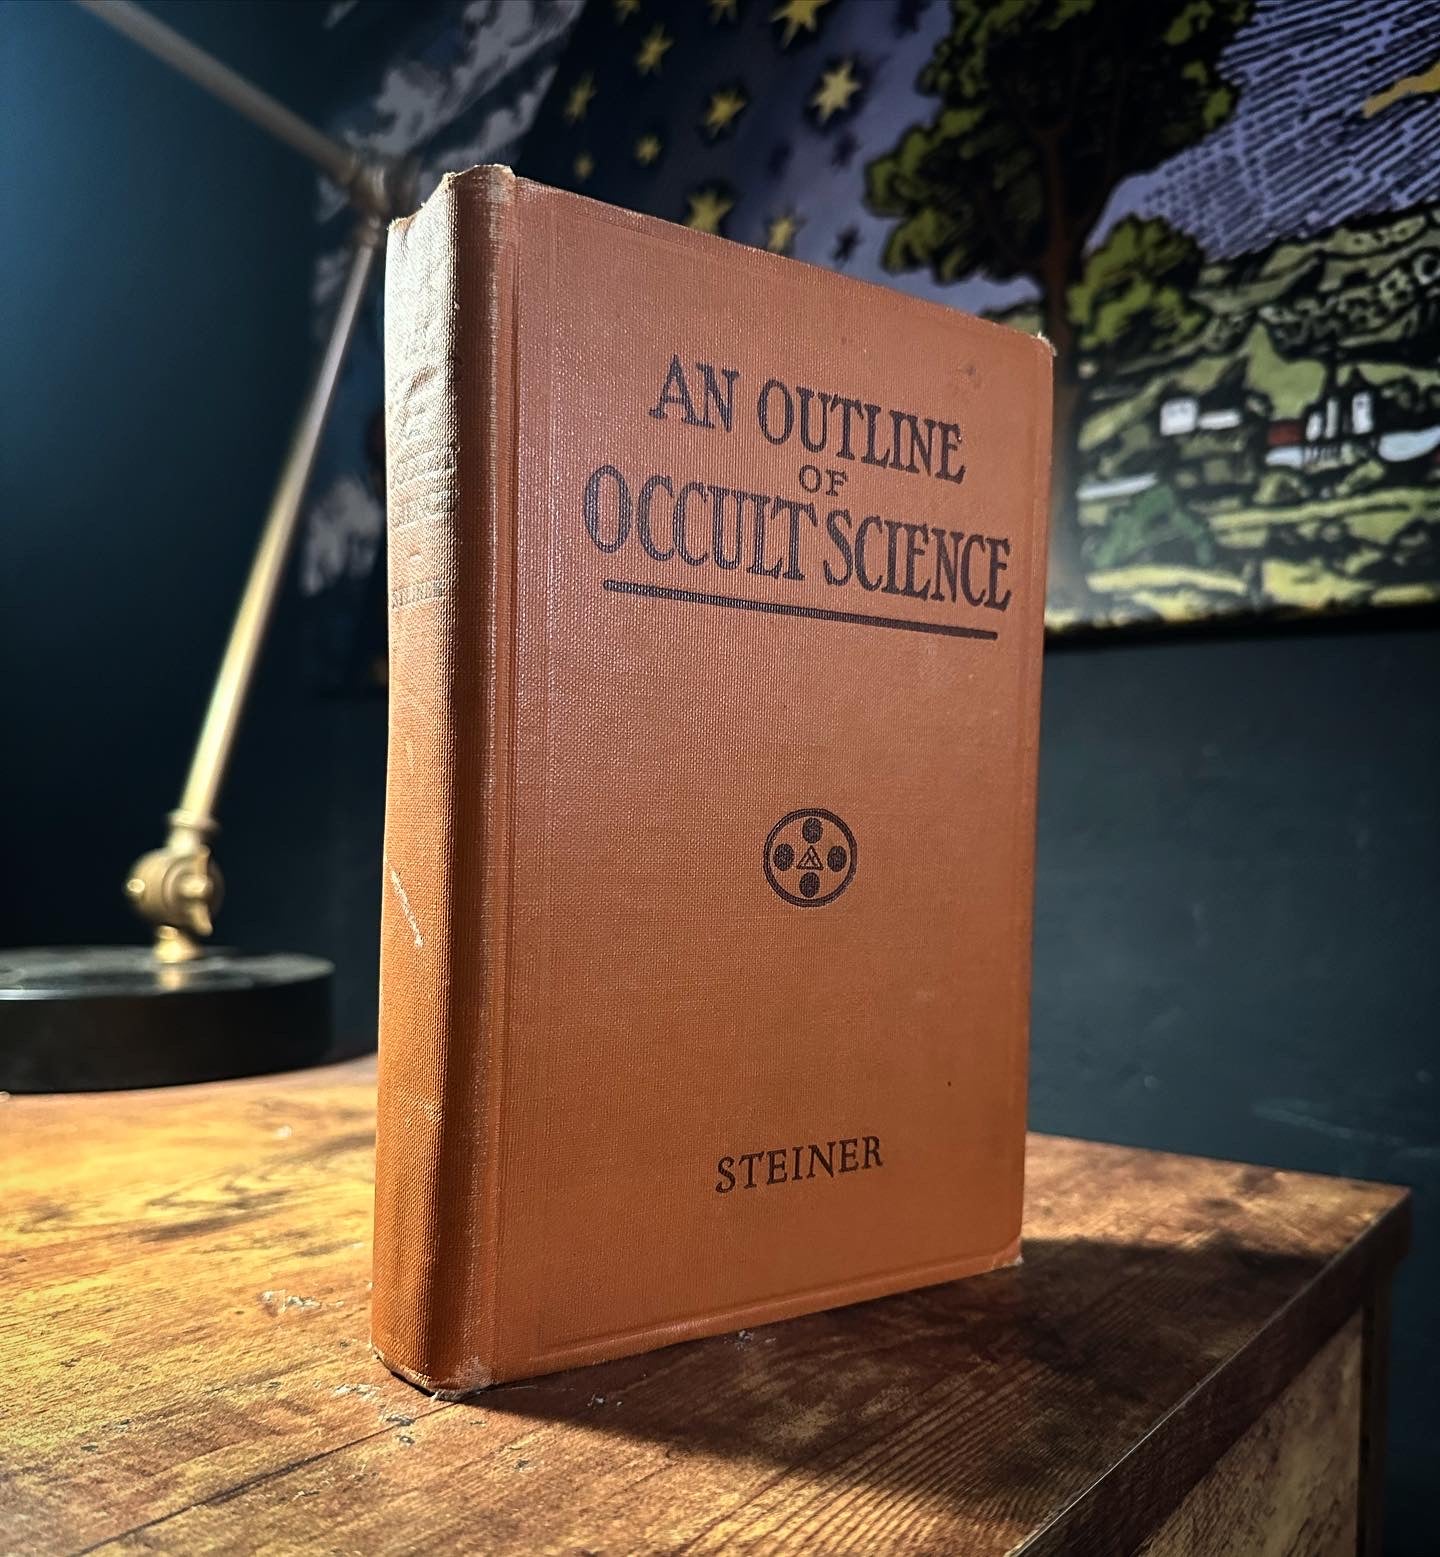 An Outline of Occult Science by Rudolf Steiner